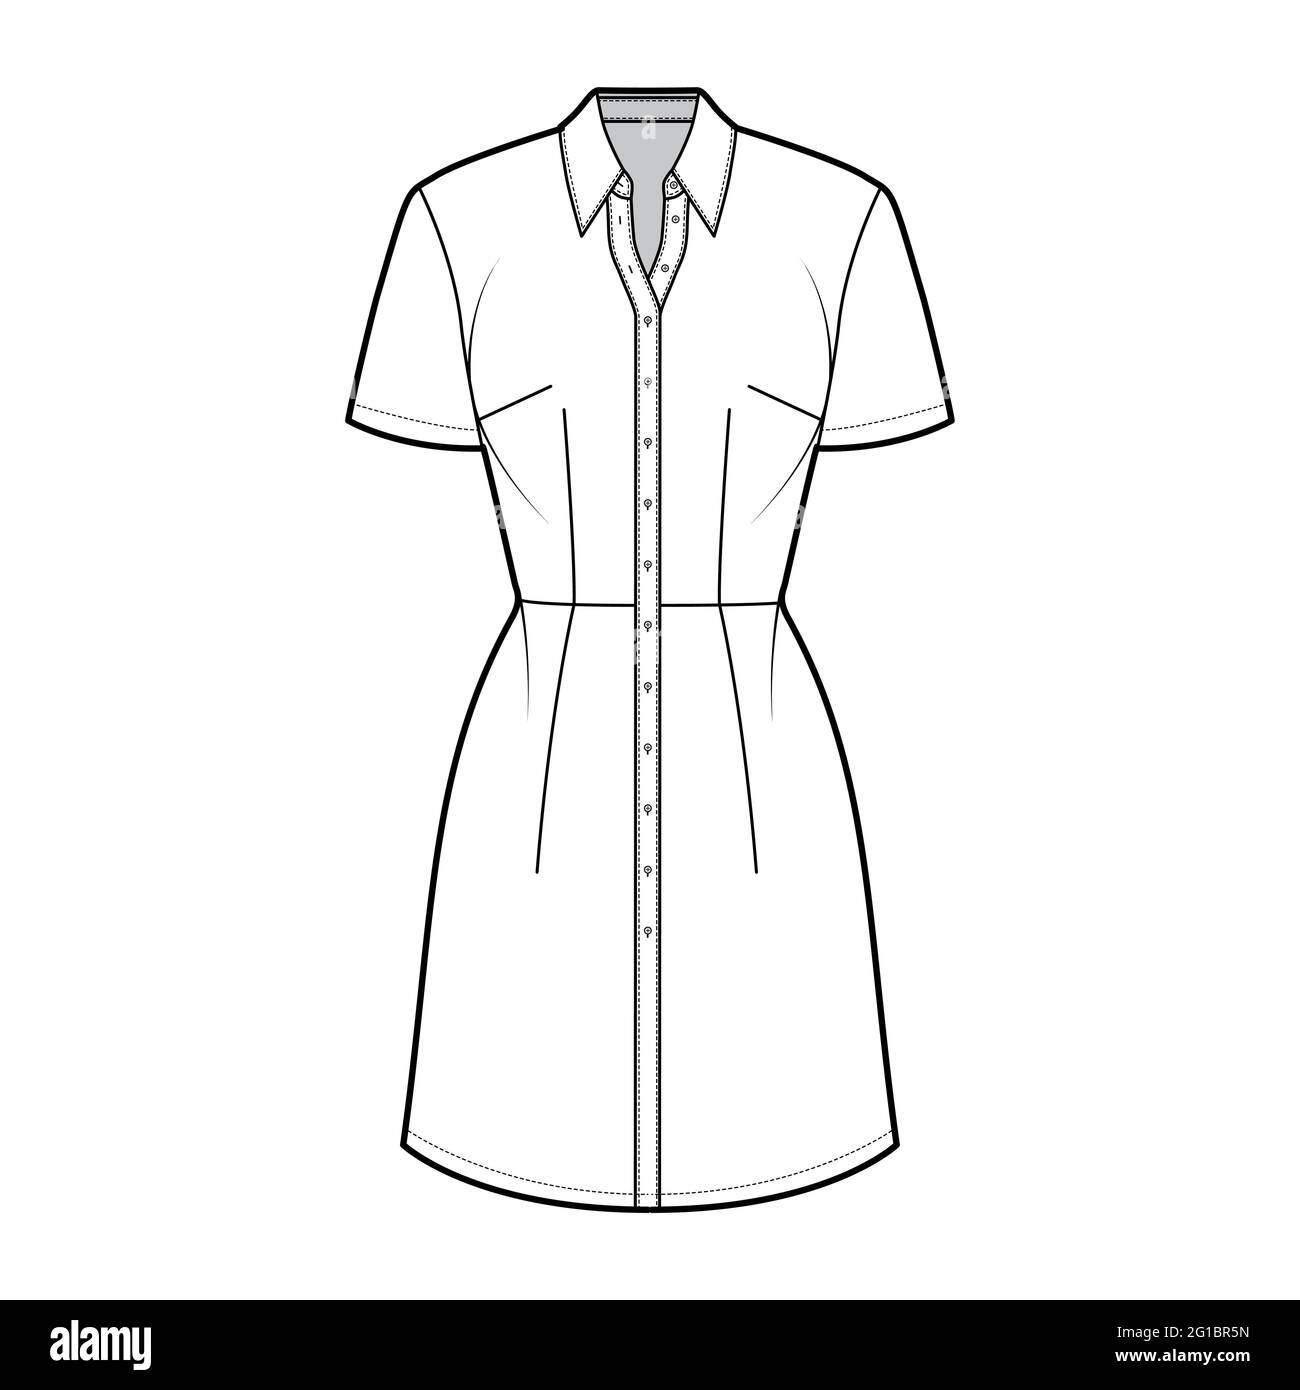 Dress shirt technical fashion illustration with short sleeves, fitted body, knee length pencil skirt, classic collar, button closure. Flat apparel front, white color. Women, men unisex CAD mockup Stock Vector